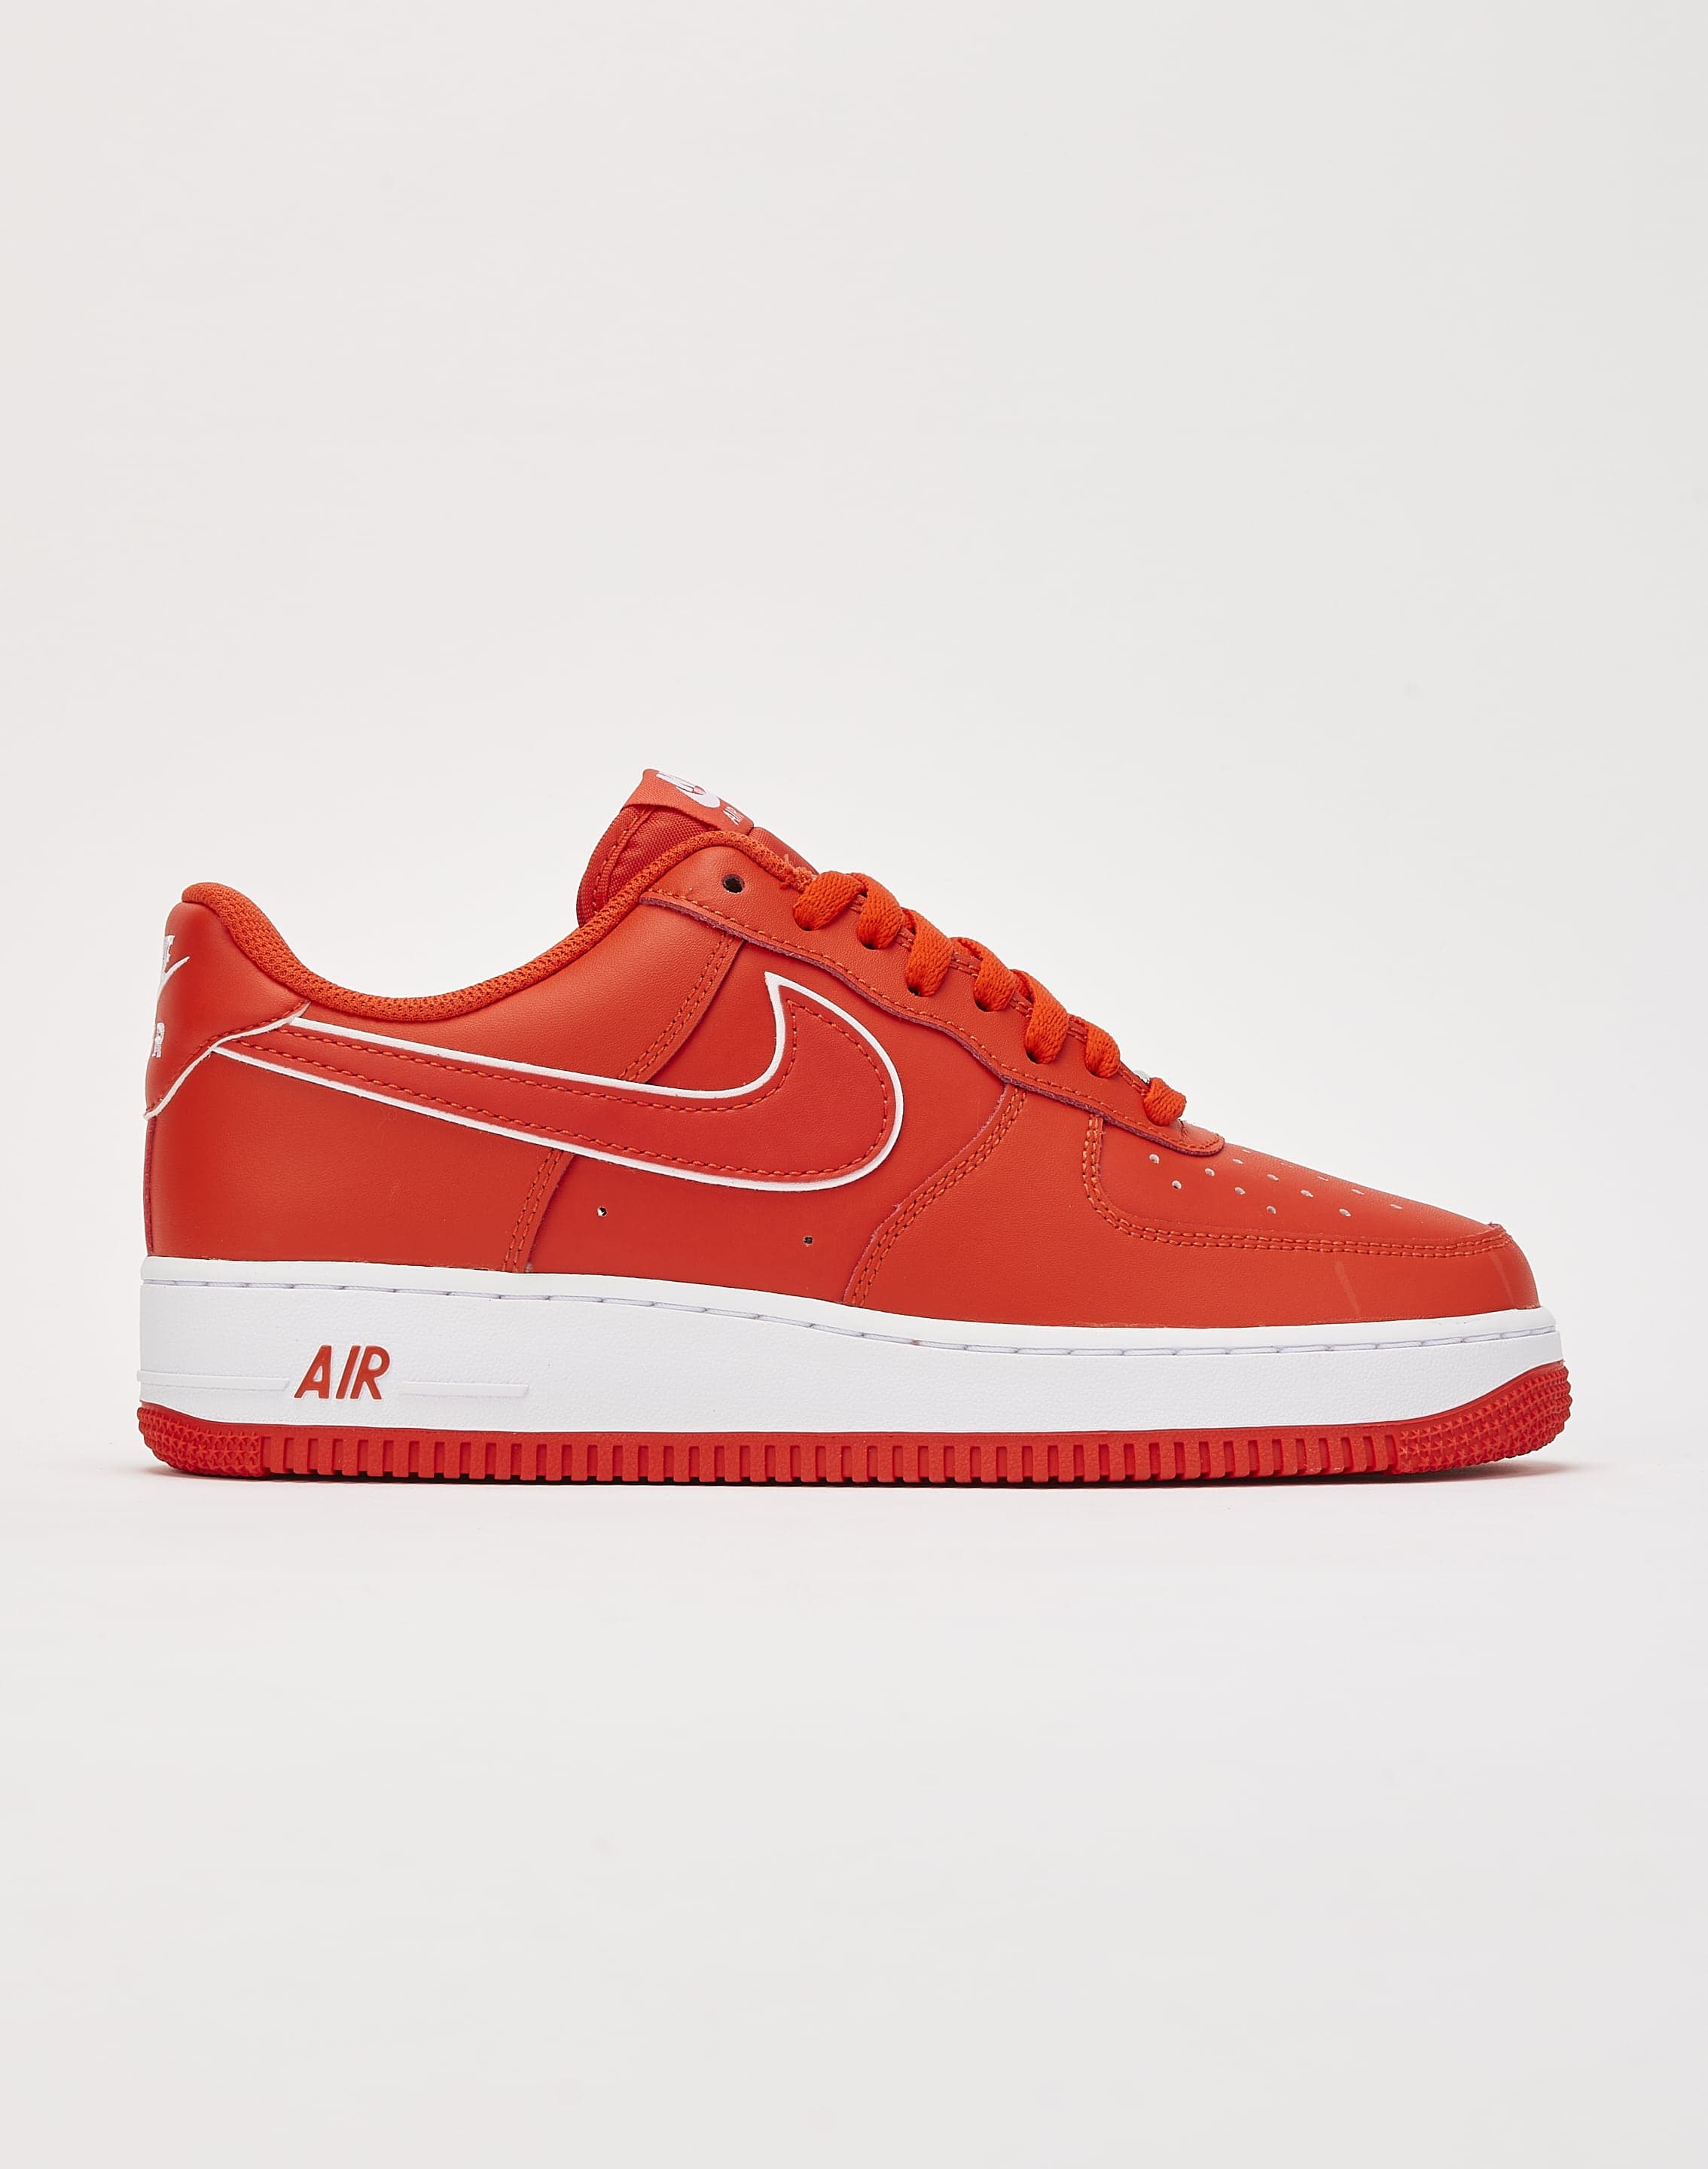 New Nike Air Force 1 '07 Low Shoes - White/Picante Red (DV0788-102) Size 9.5